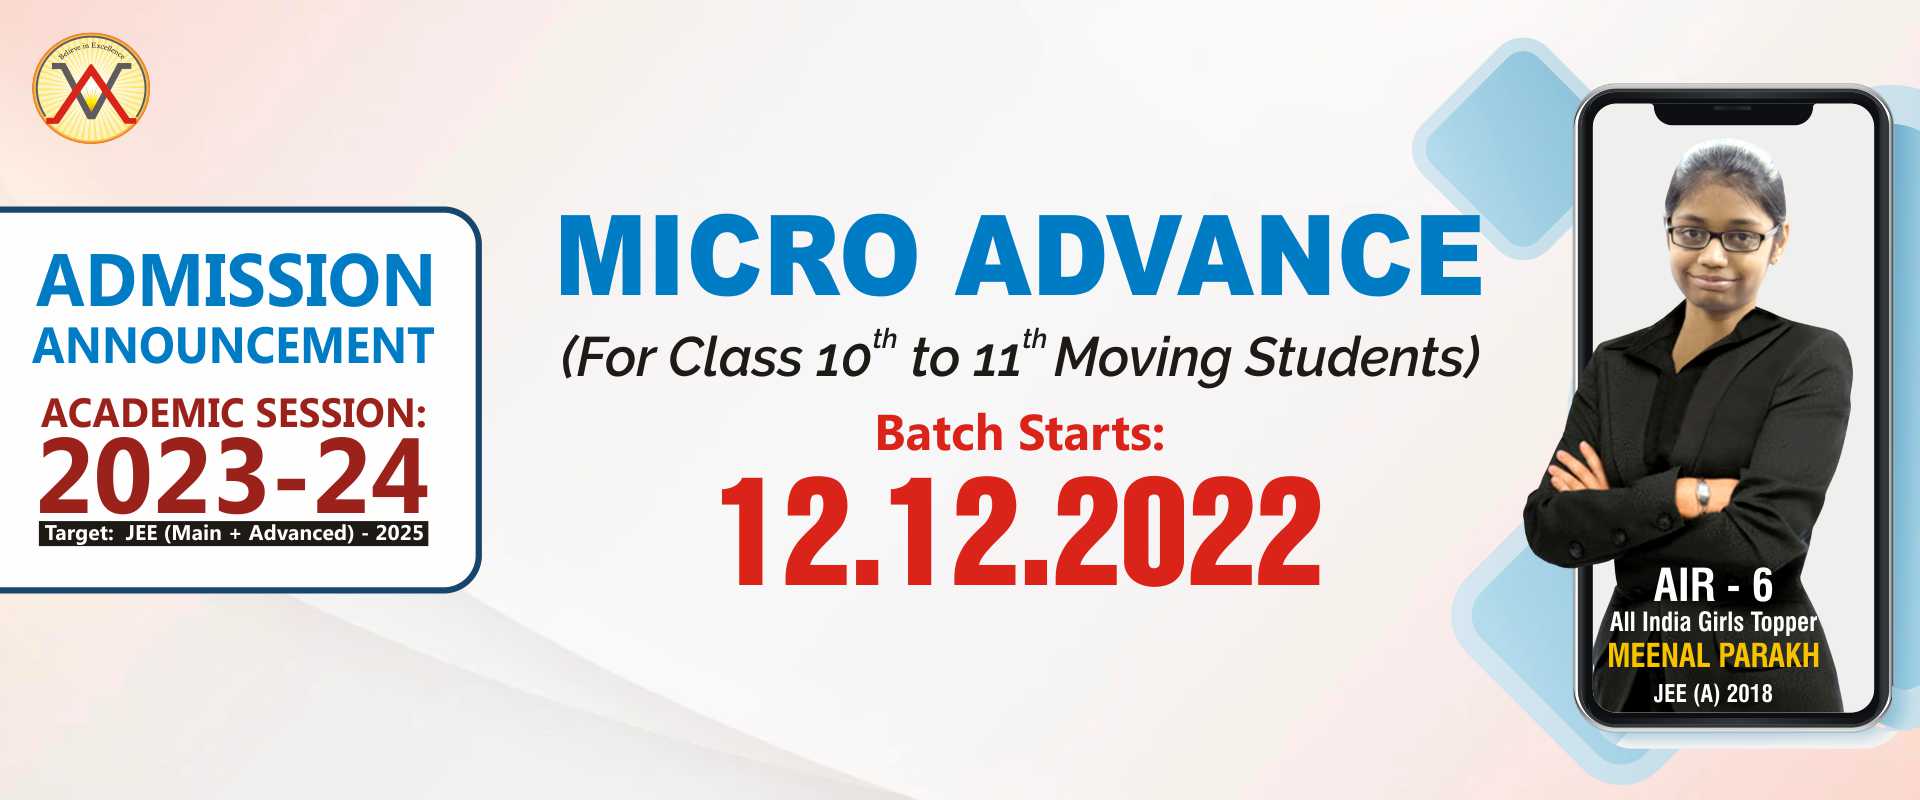 Micro Advance (For class 10 to 11 Moving Students)